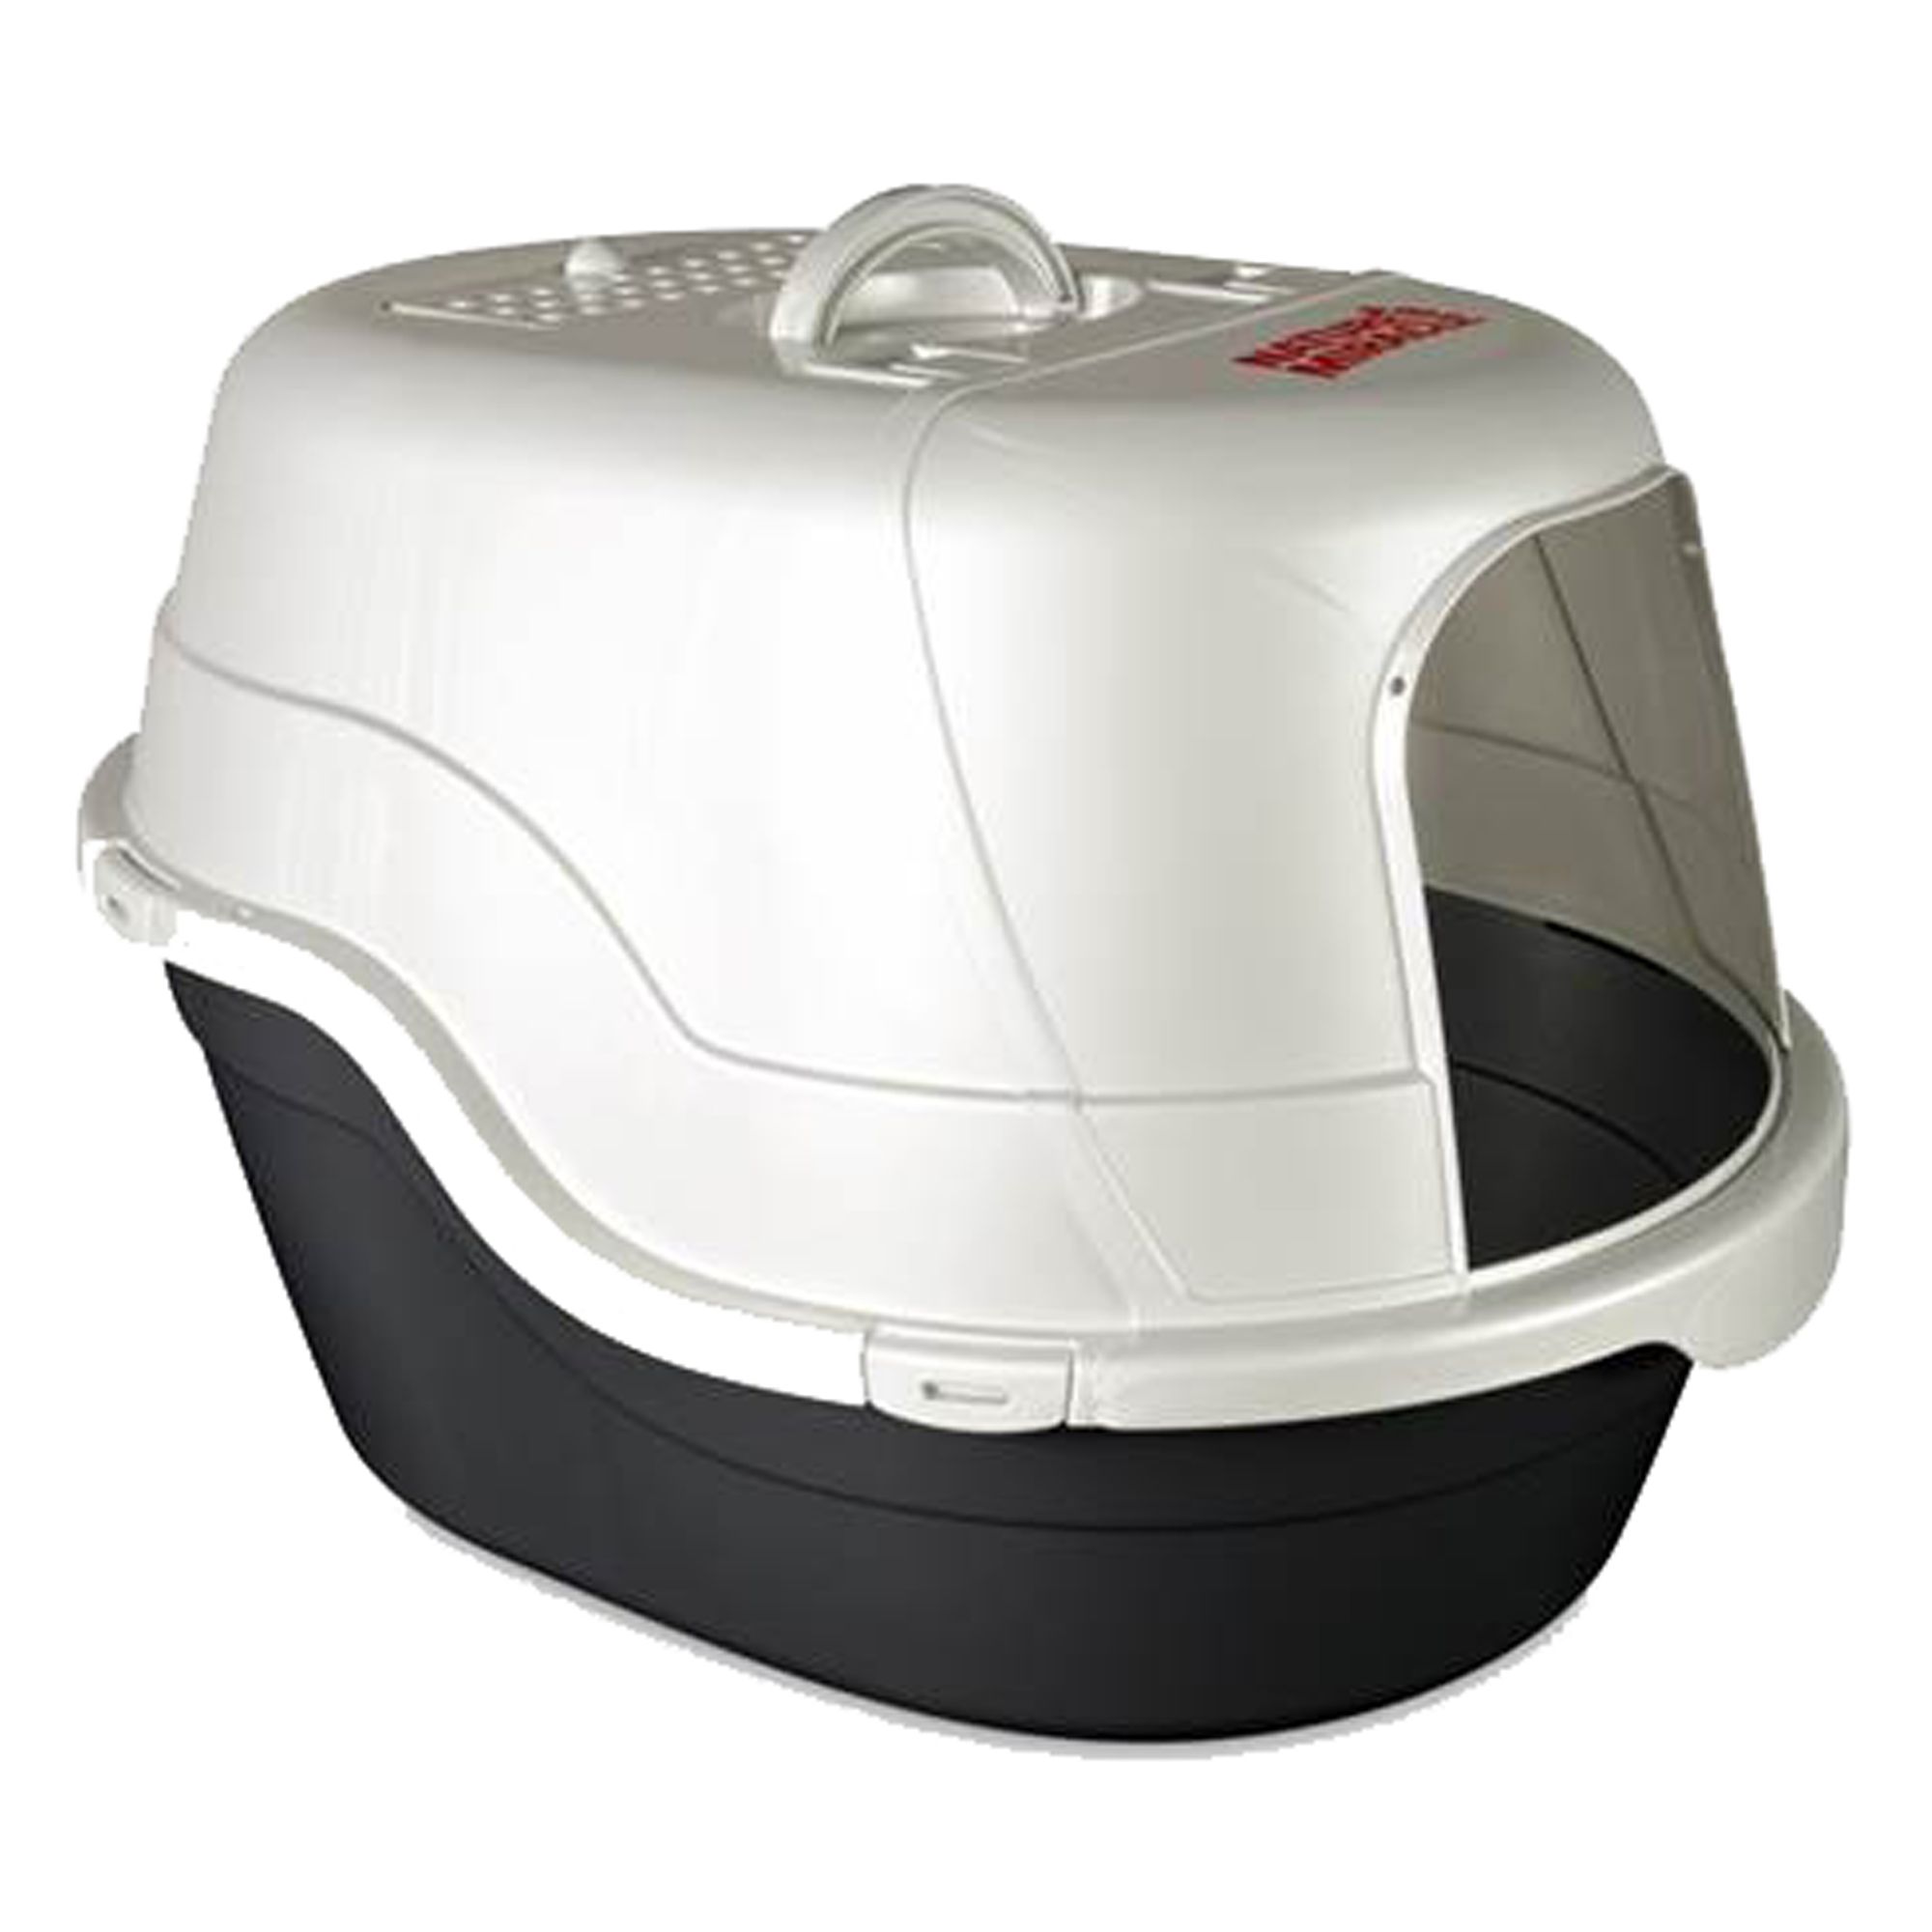 kitty litter box with lid